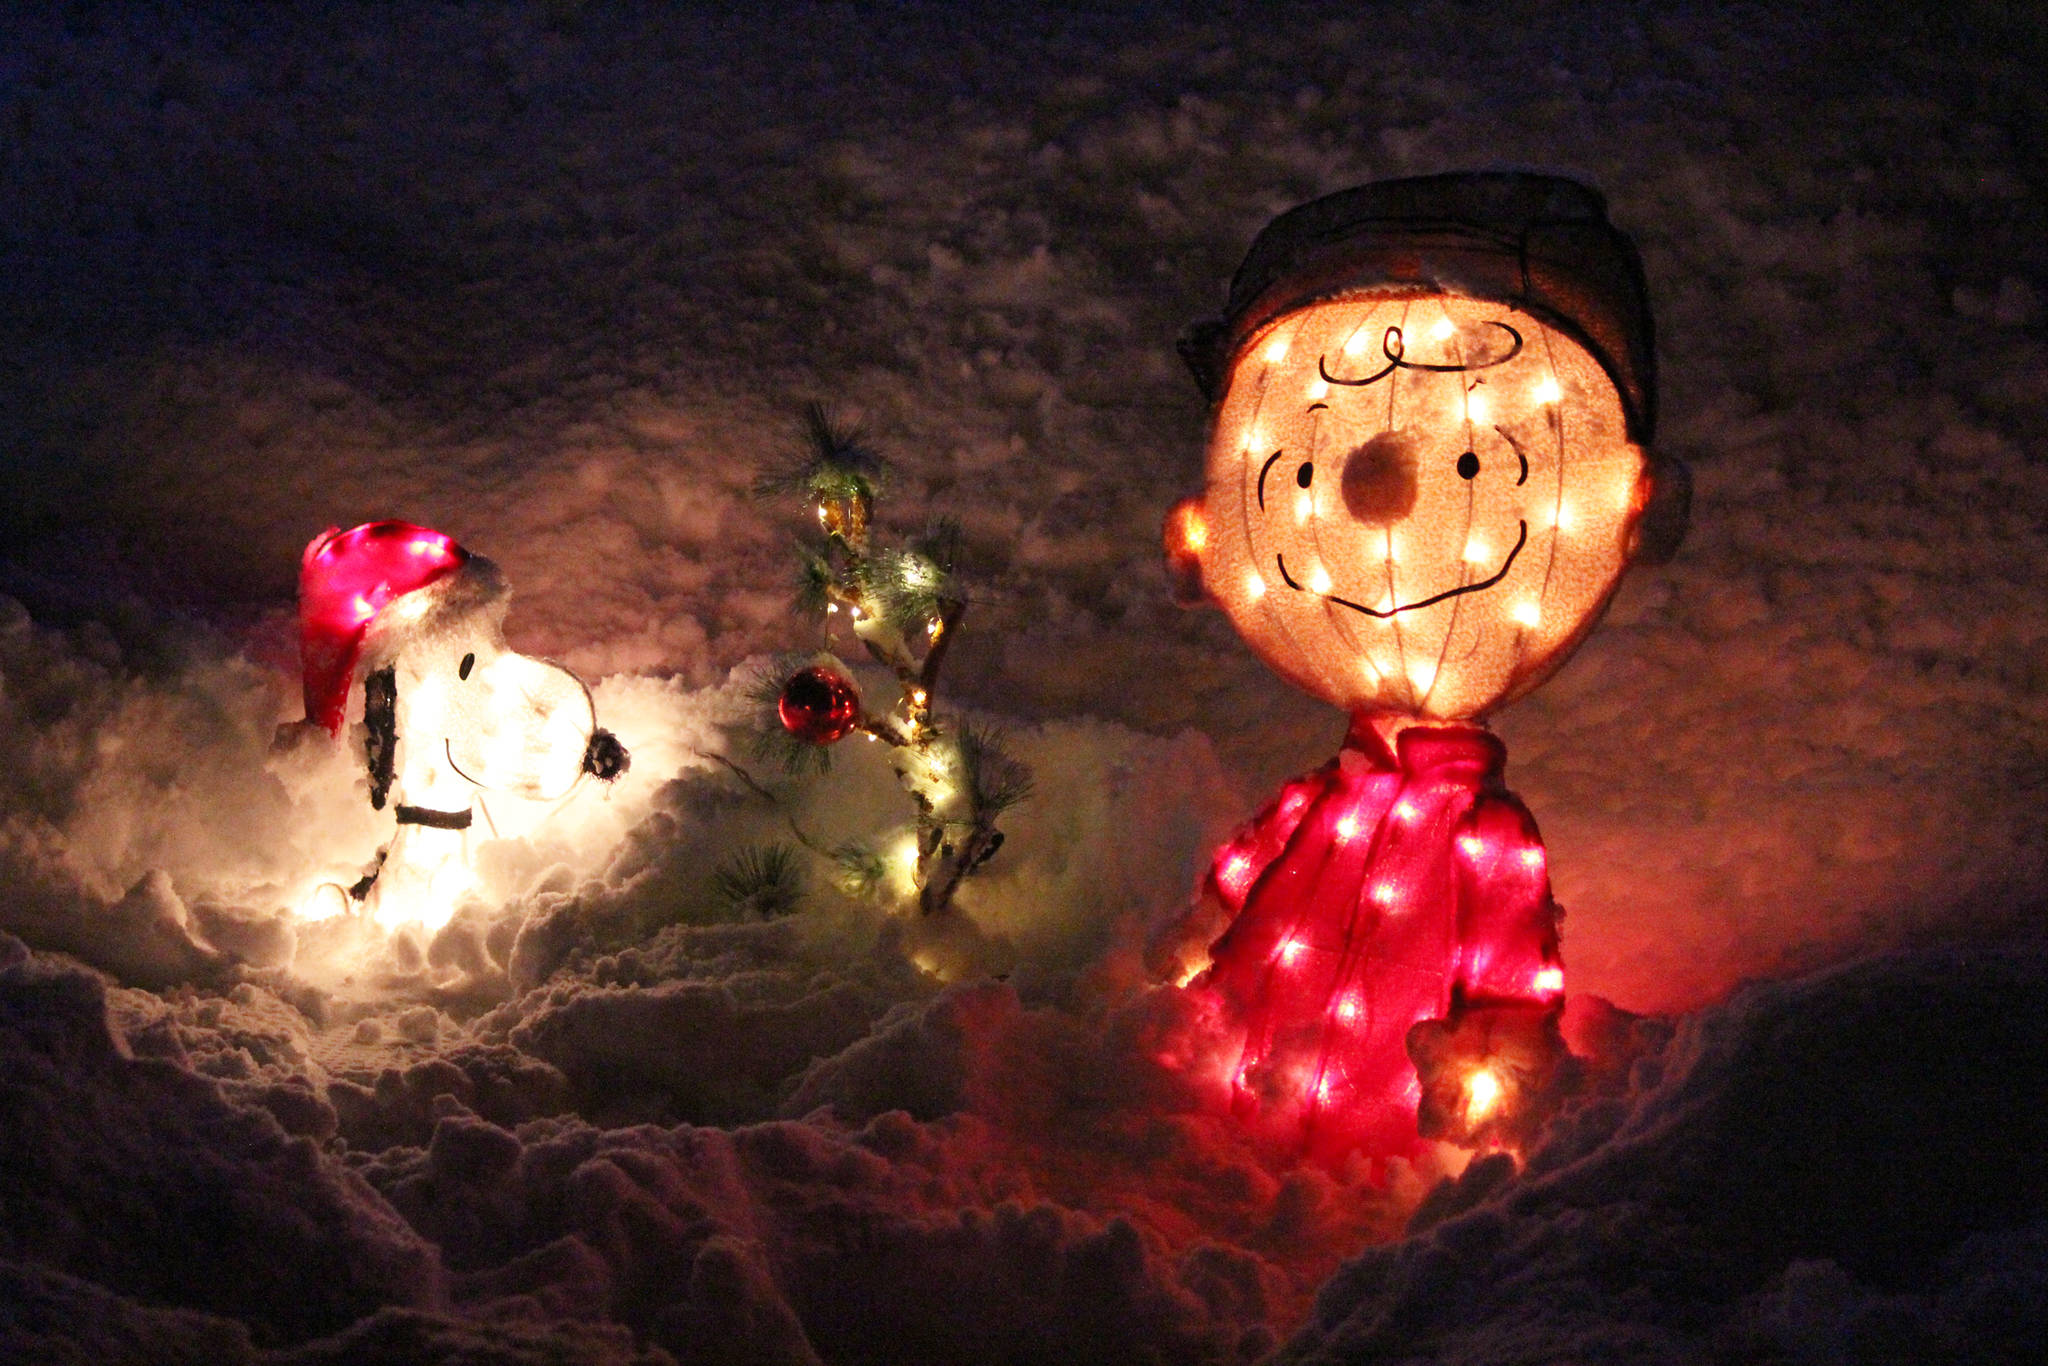 Lights made to look like the characters of Snoopy and Charlie Brown rest in the snow Friday, Dec. 15, 2018 at the Bear Creek Winery Garden Lights at the winery in Kachemak City, Alaska. The lights will run one more weekend, from 5-7 p.m. Friday and Saturday, Dec. 21-22. (Photo by Megan Pacer/Homer News)